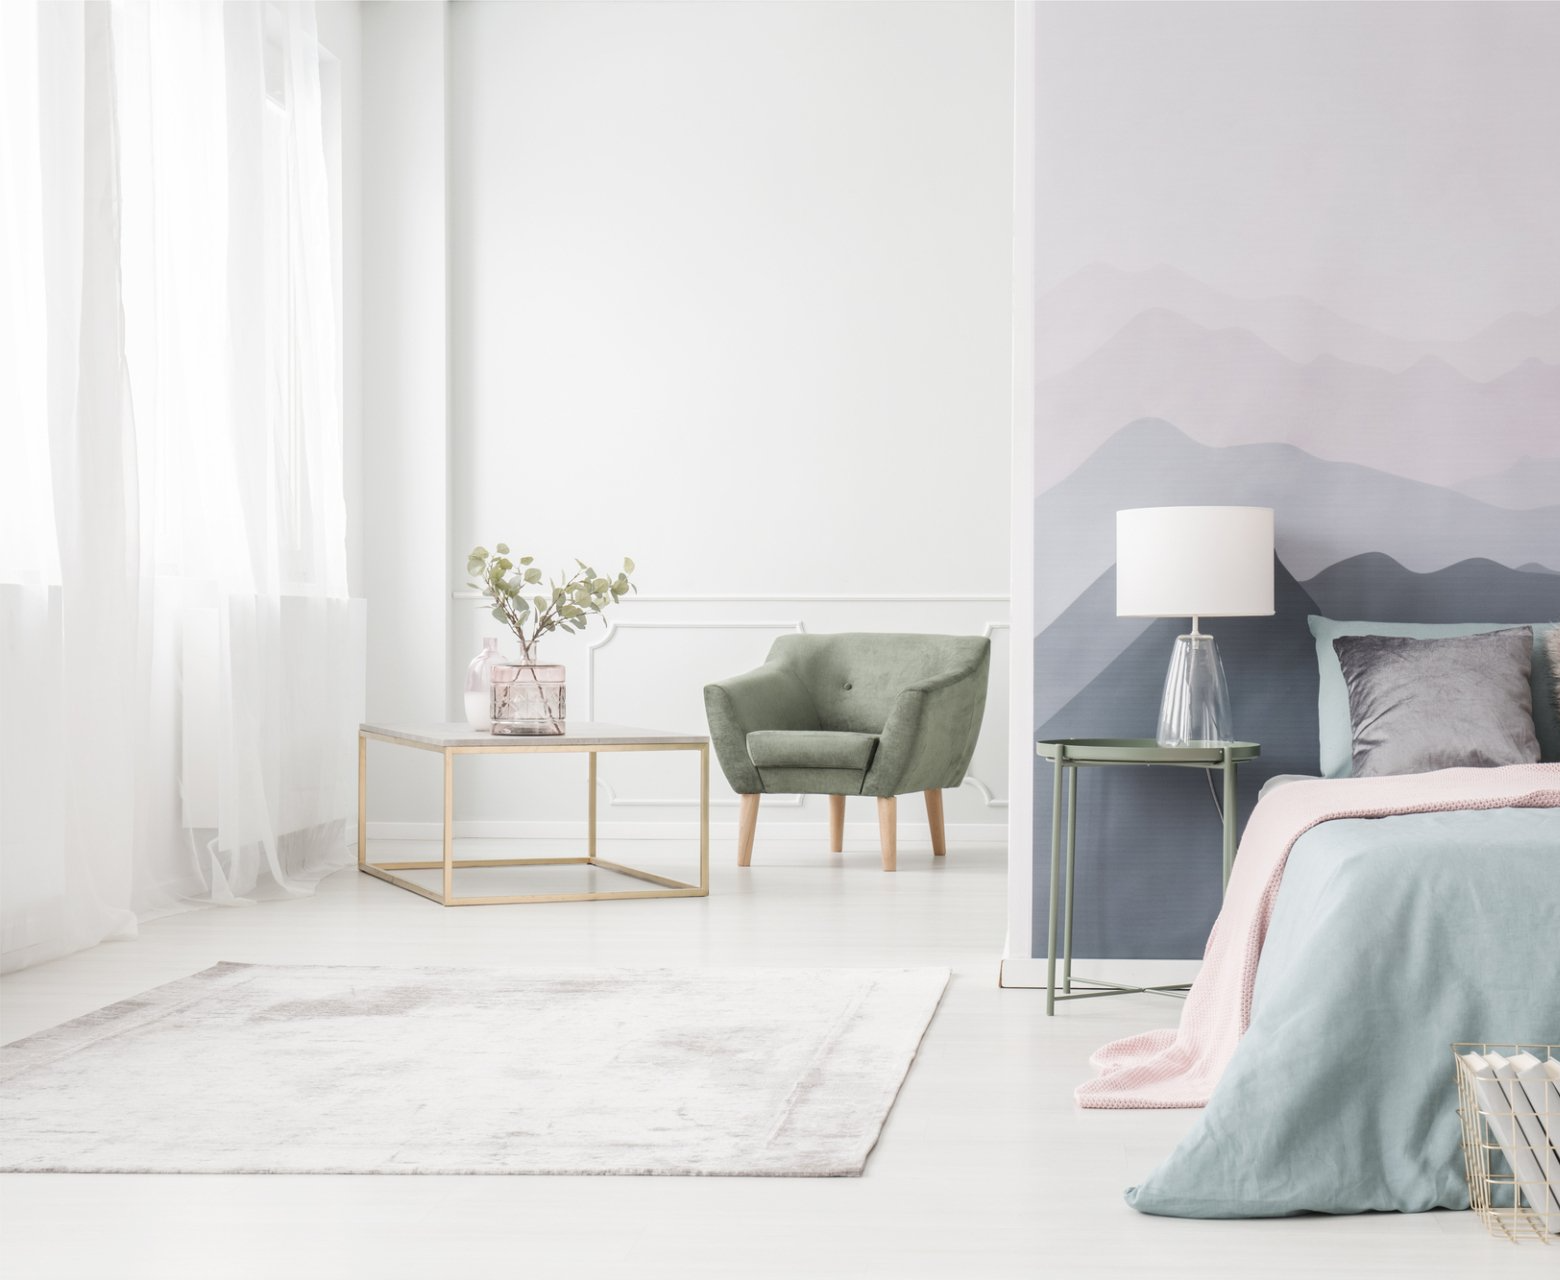 Pastel coloured bedroom showing bed, sidetable and lamp, with soft chair and table in front of opaque curtains.